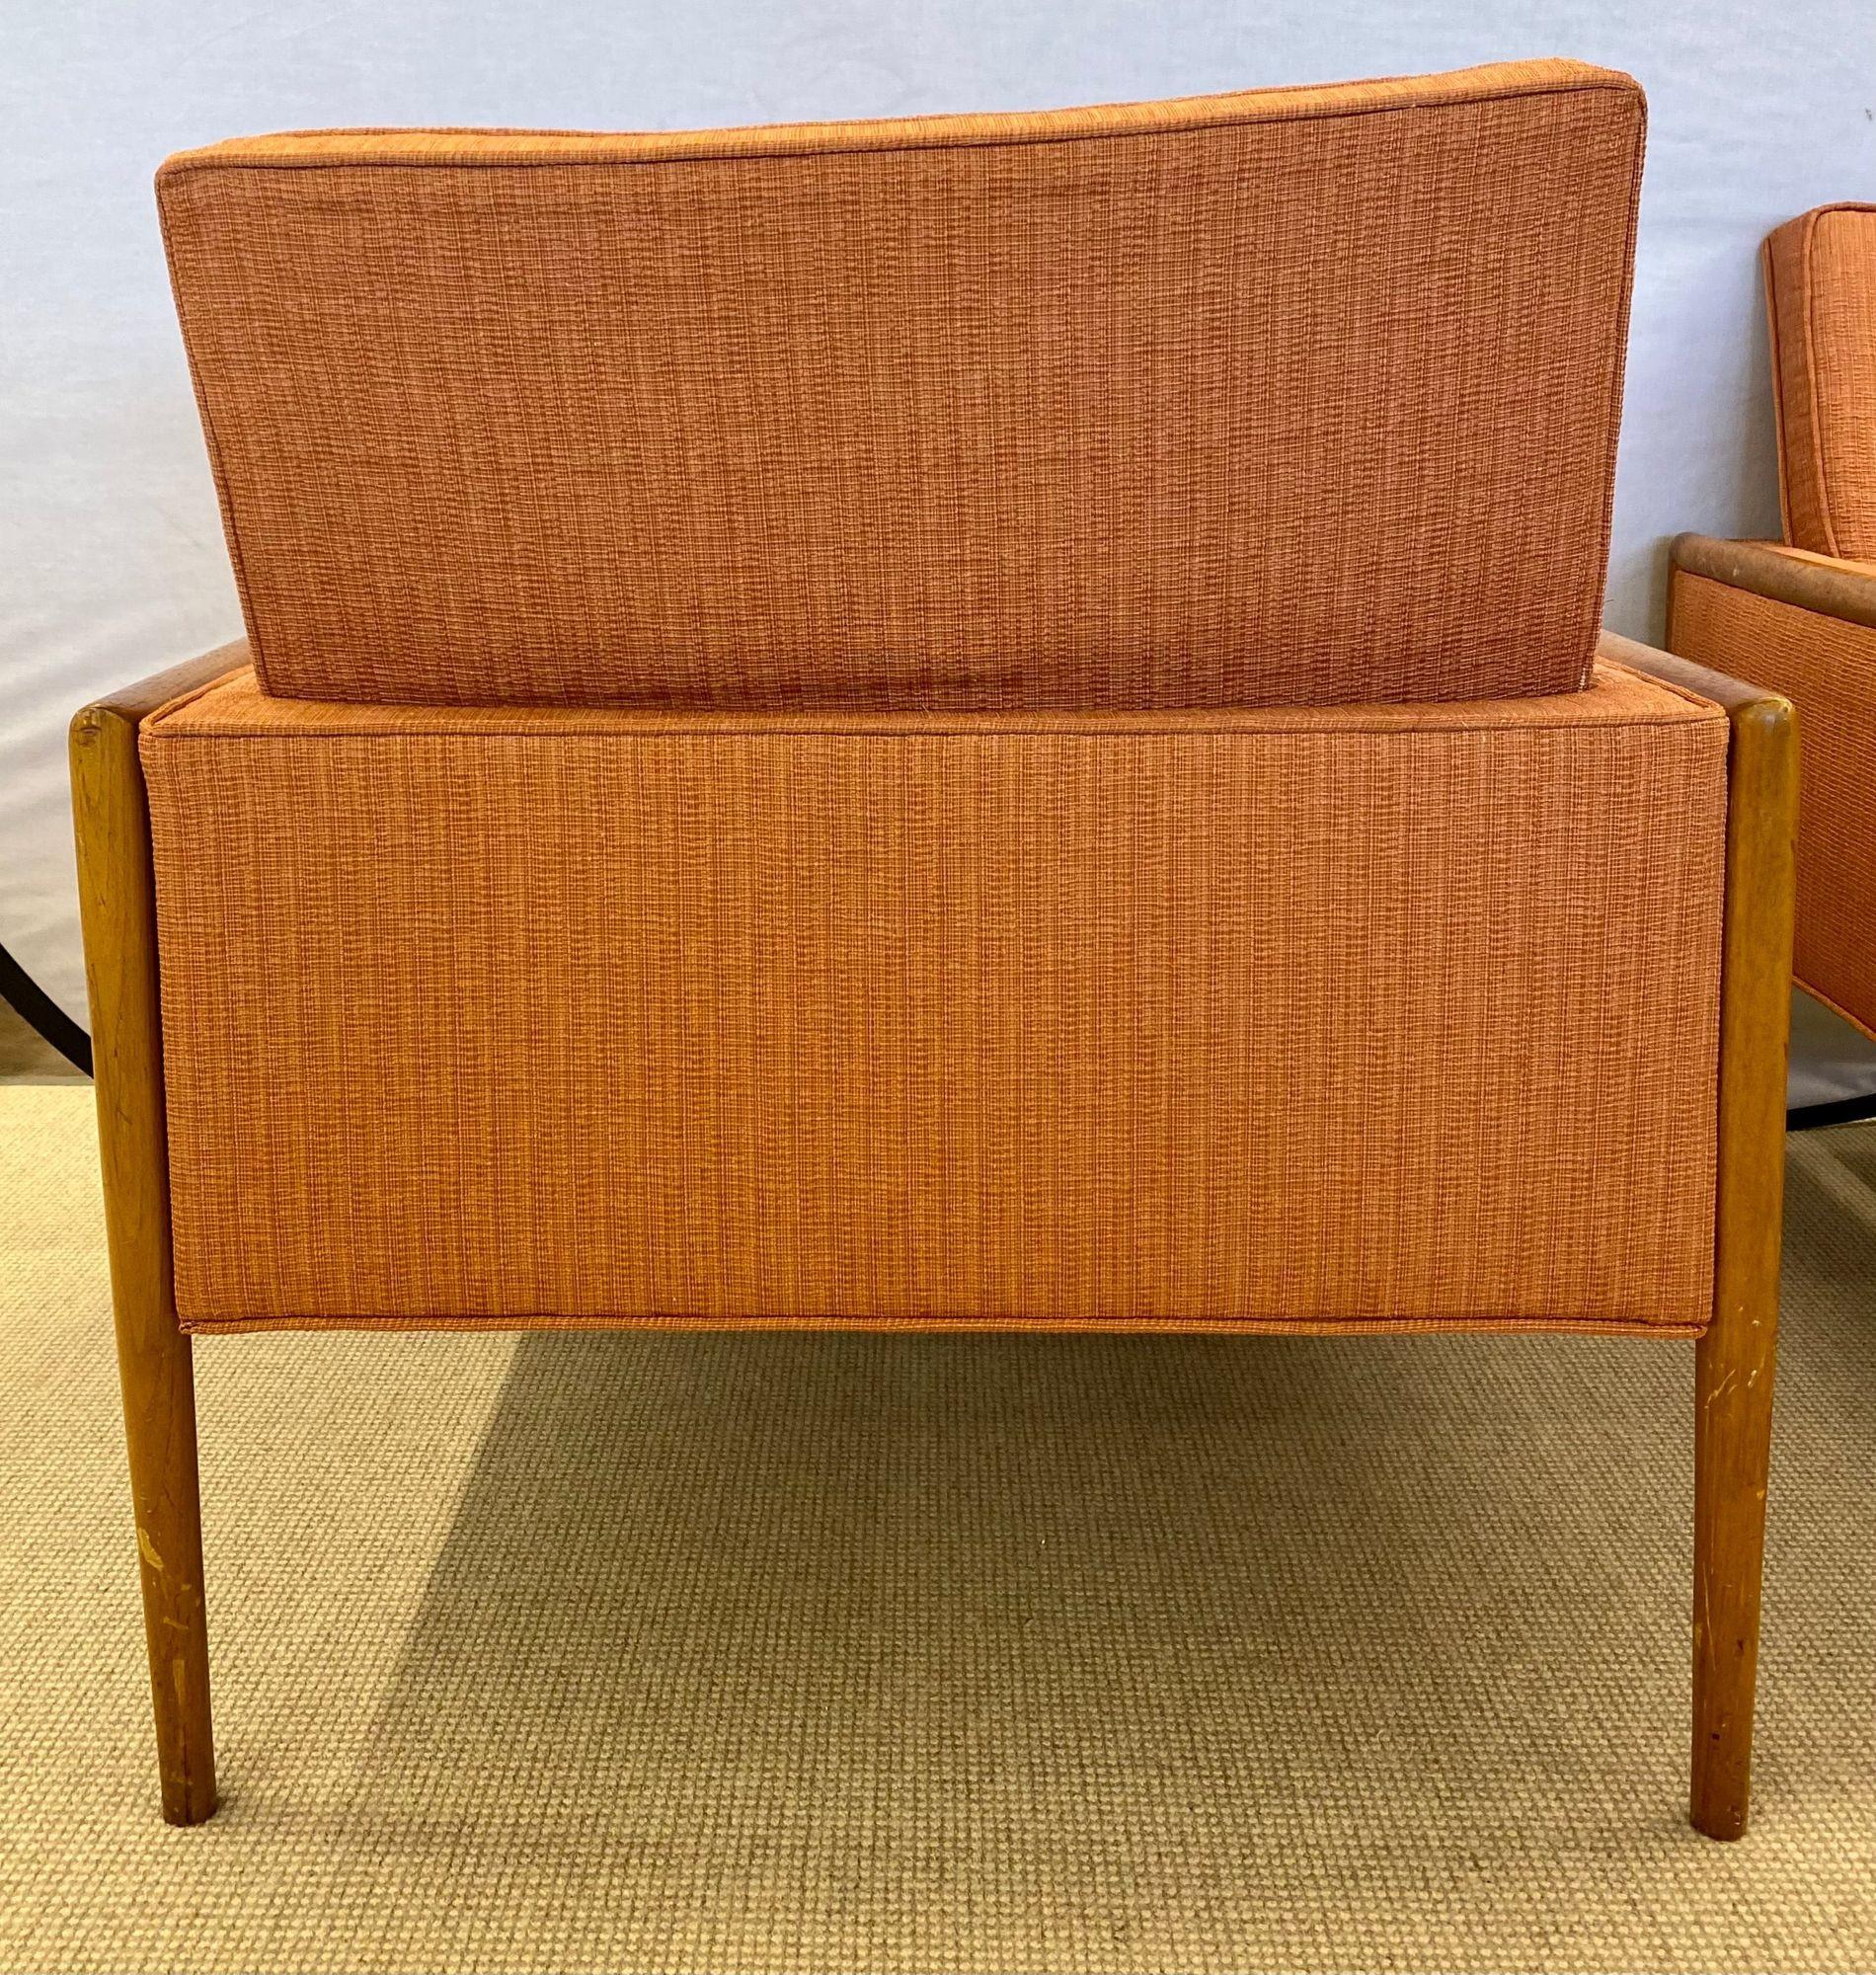 Pair of Mid-Century Modern Lounge Chairs, American, Walnut, 1960s For Sale 8